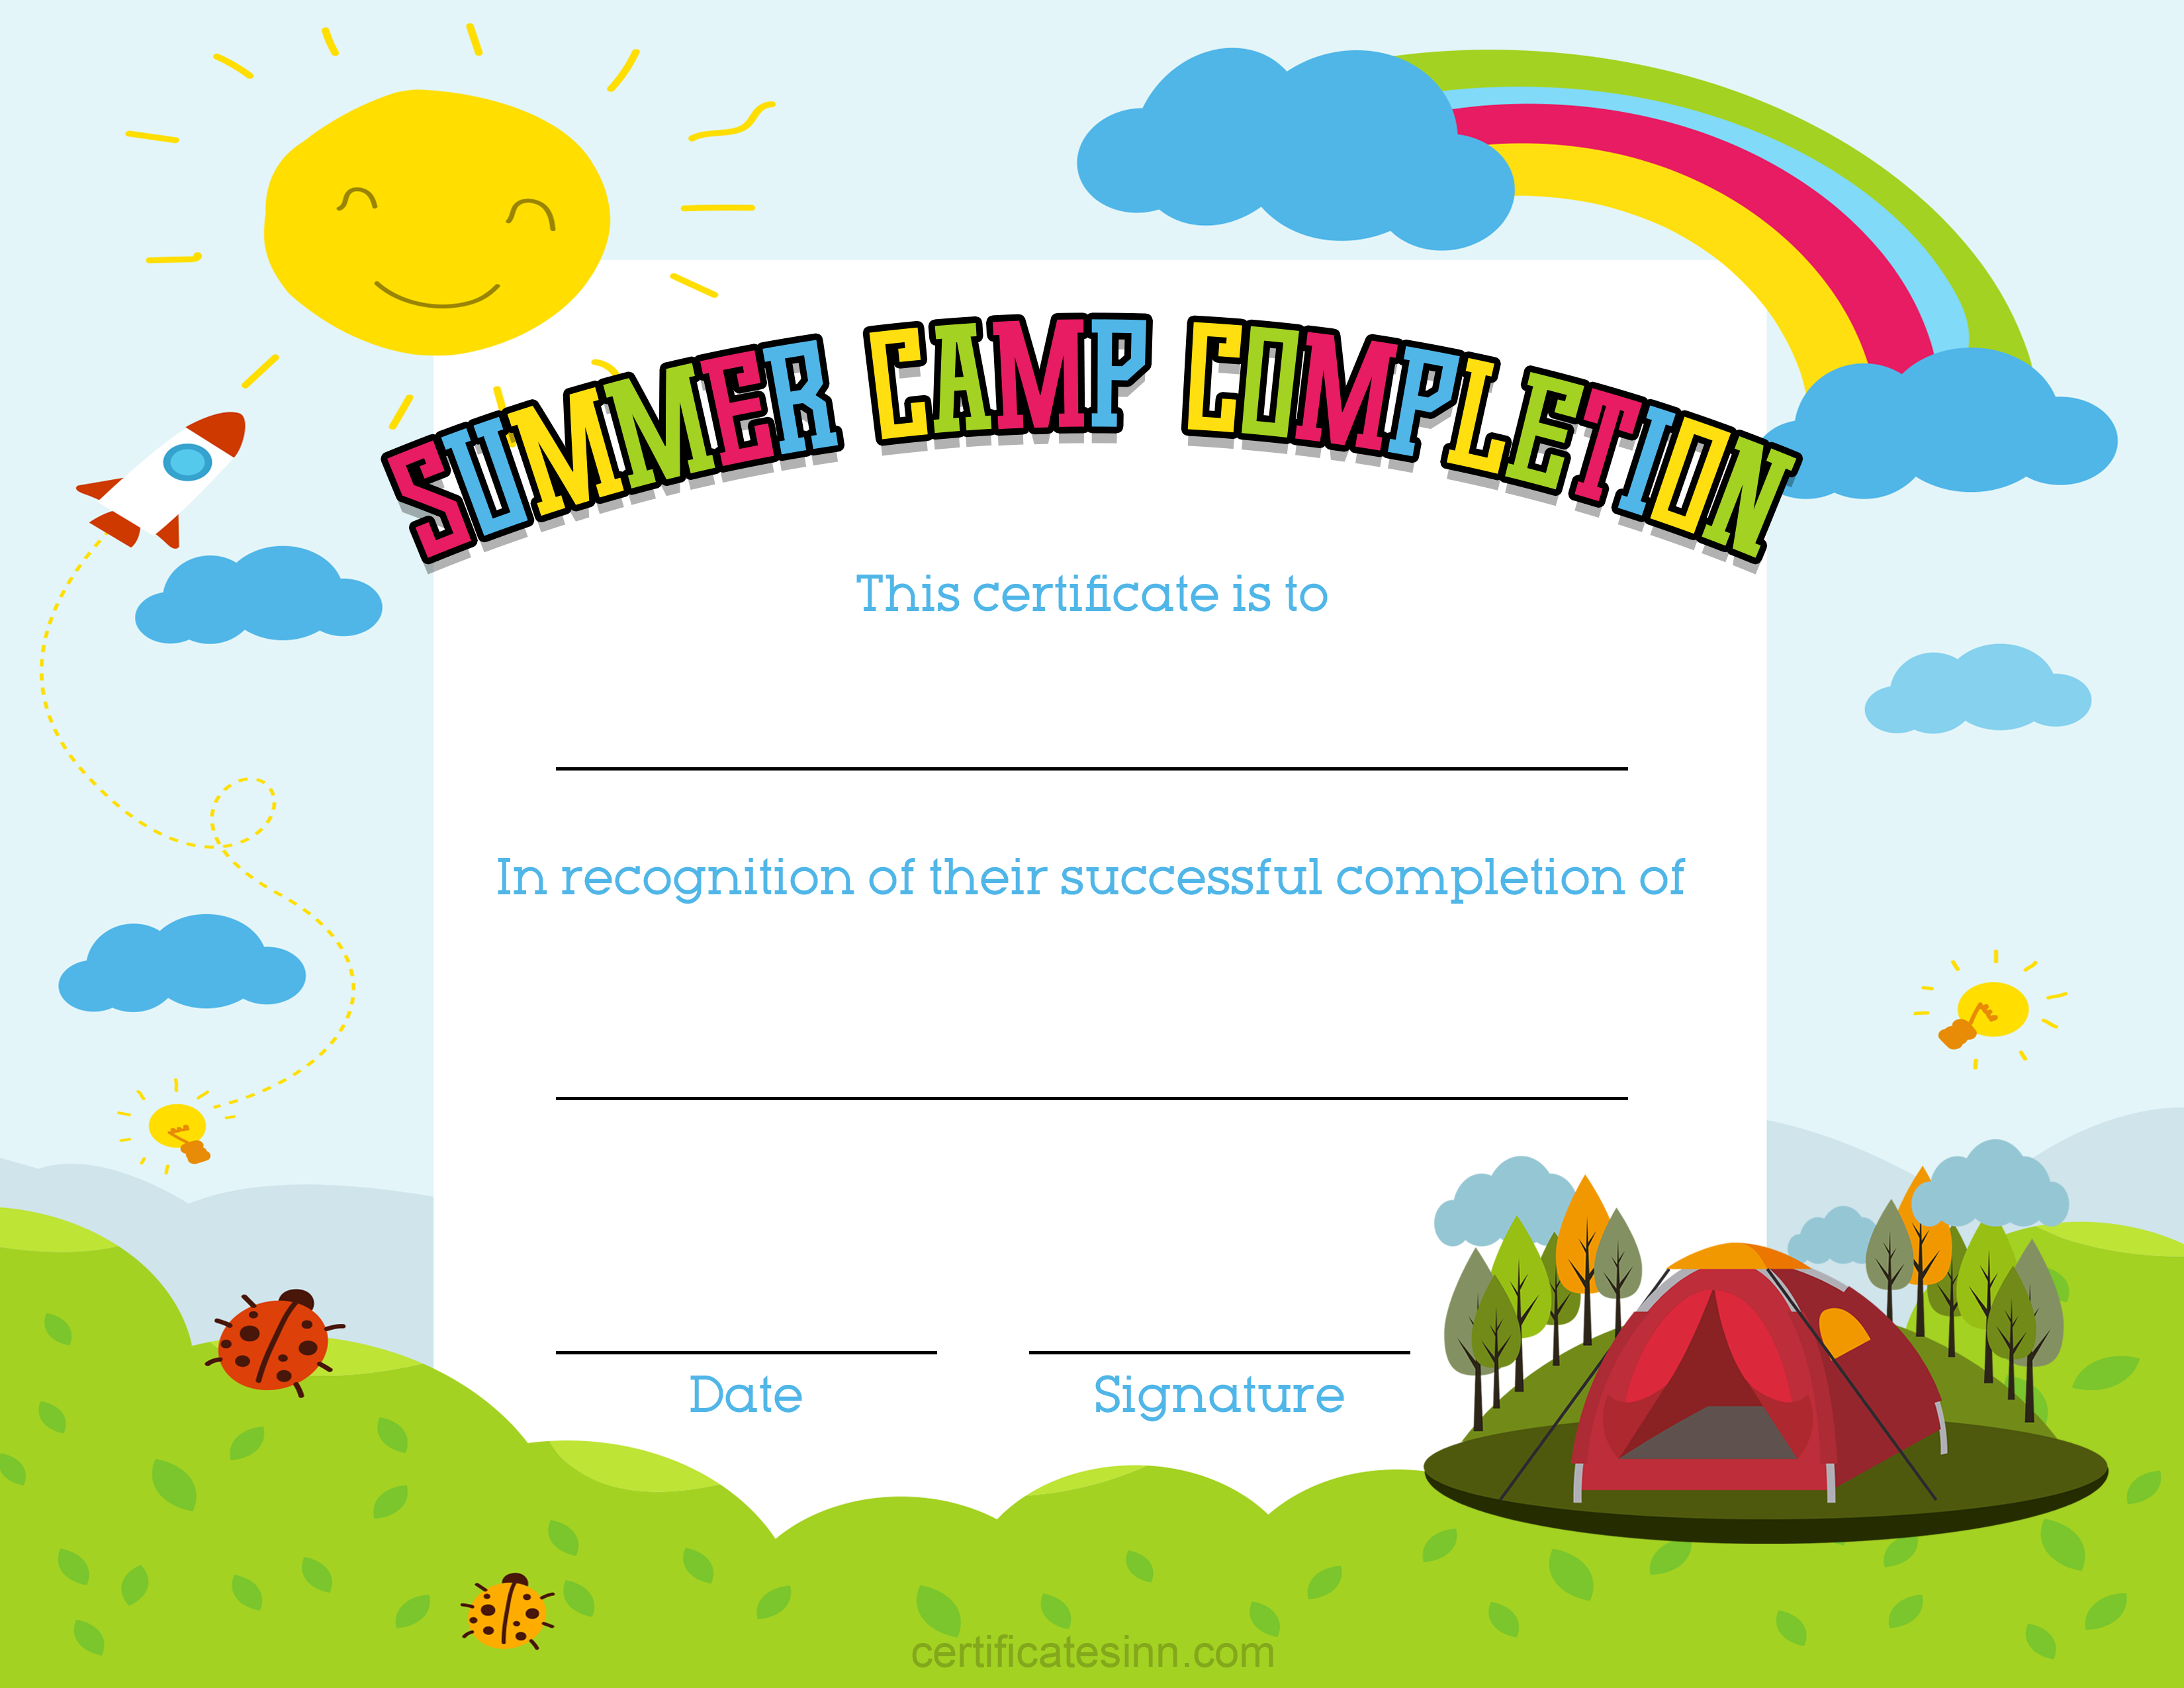 Summer Camp Completion Certificate Templates For Word  With Summer Camp Certificate Template